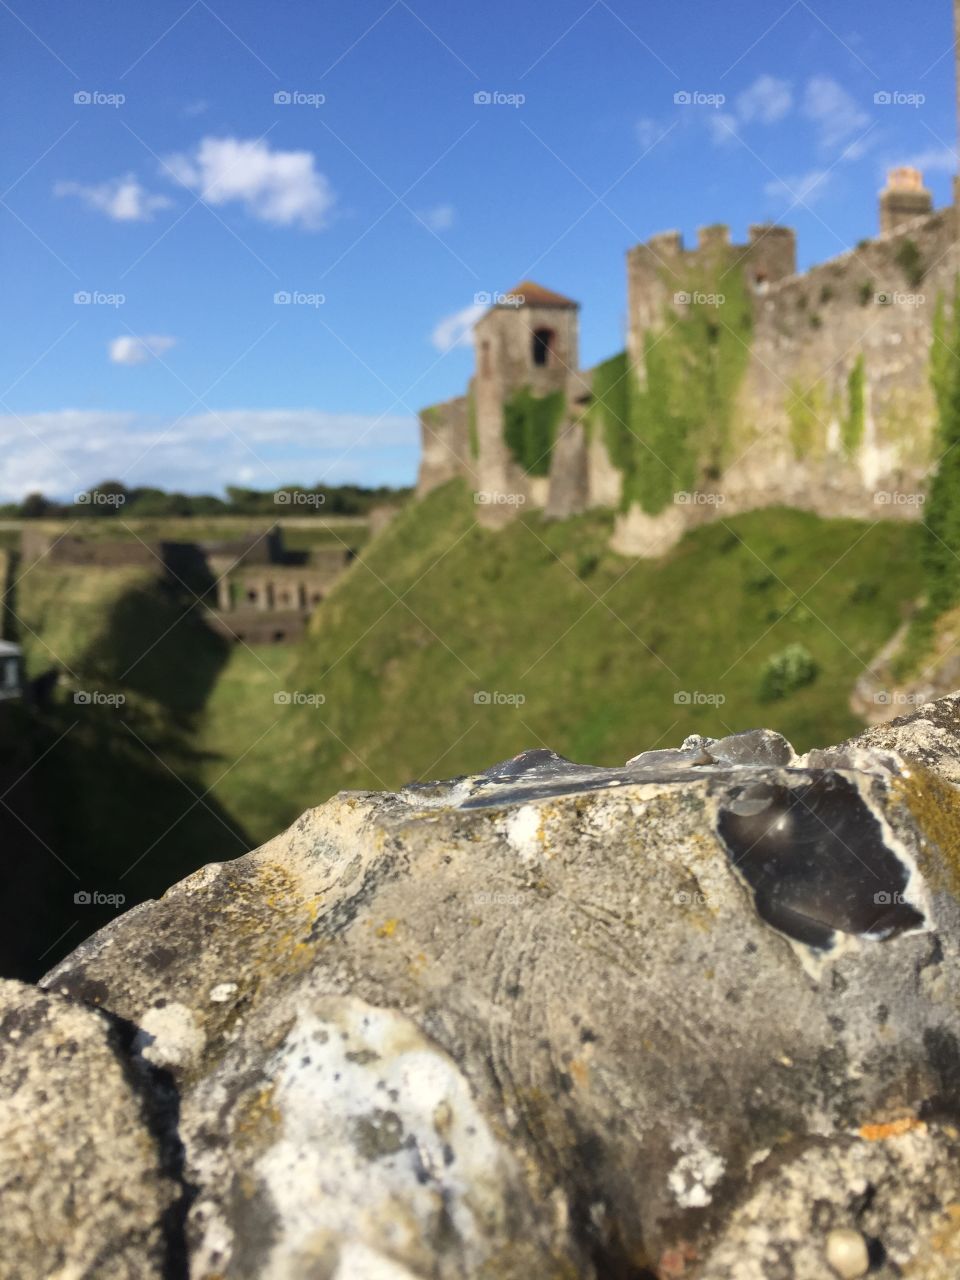 Castle views of vivid green fields, full of fresh grass and clear blue skies. Emerald green trees are lined up in rows in the horizon, with an intricate rock formation in the foreground 